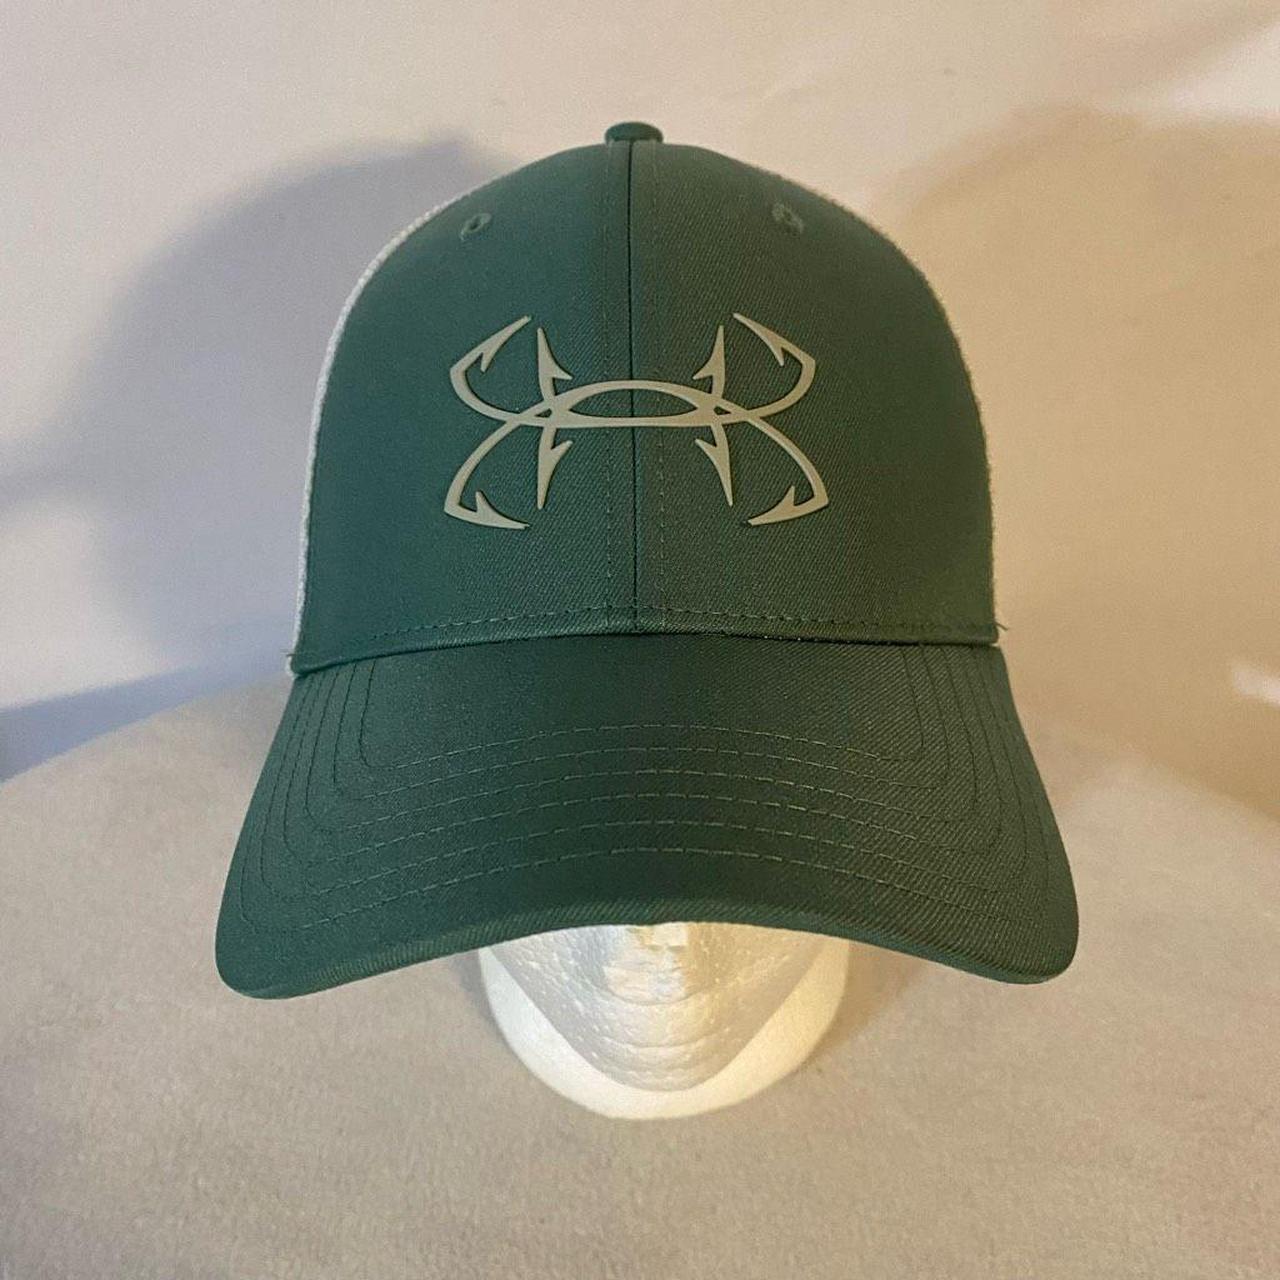 Under Armour Med/large Green And White Fish Hat Cap - Depop